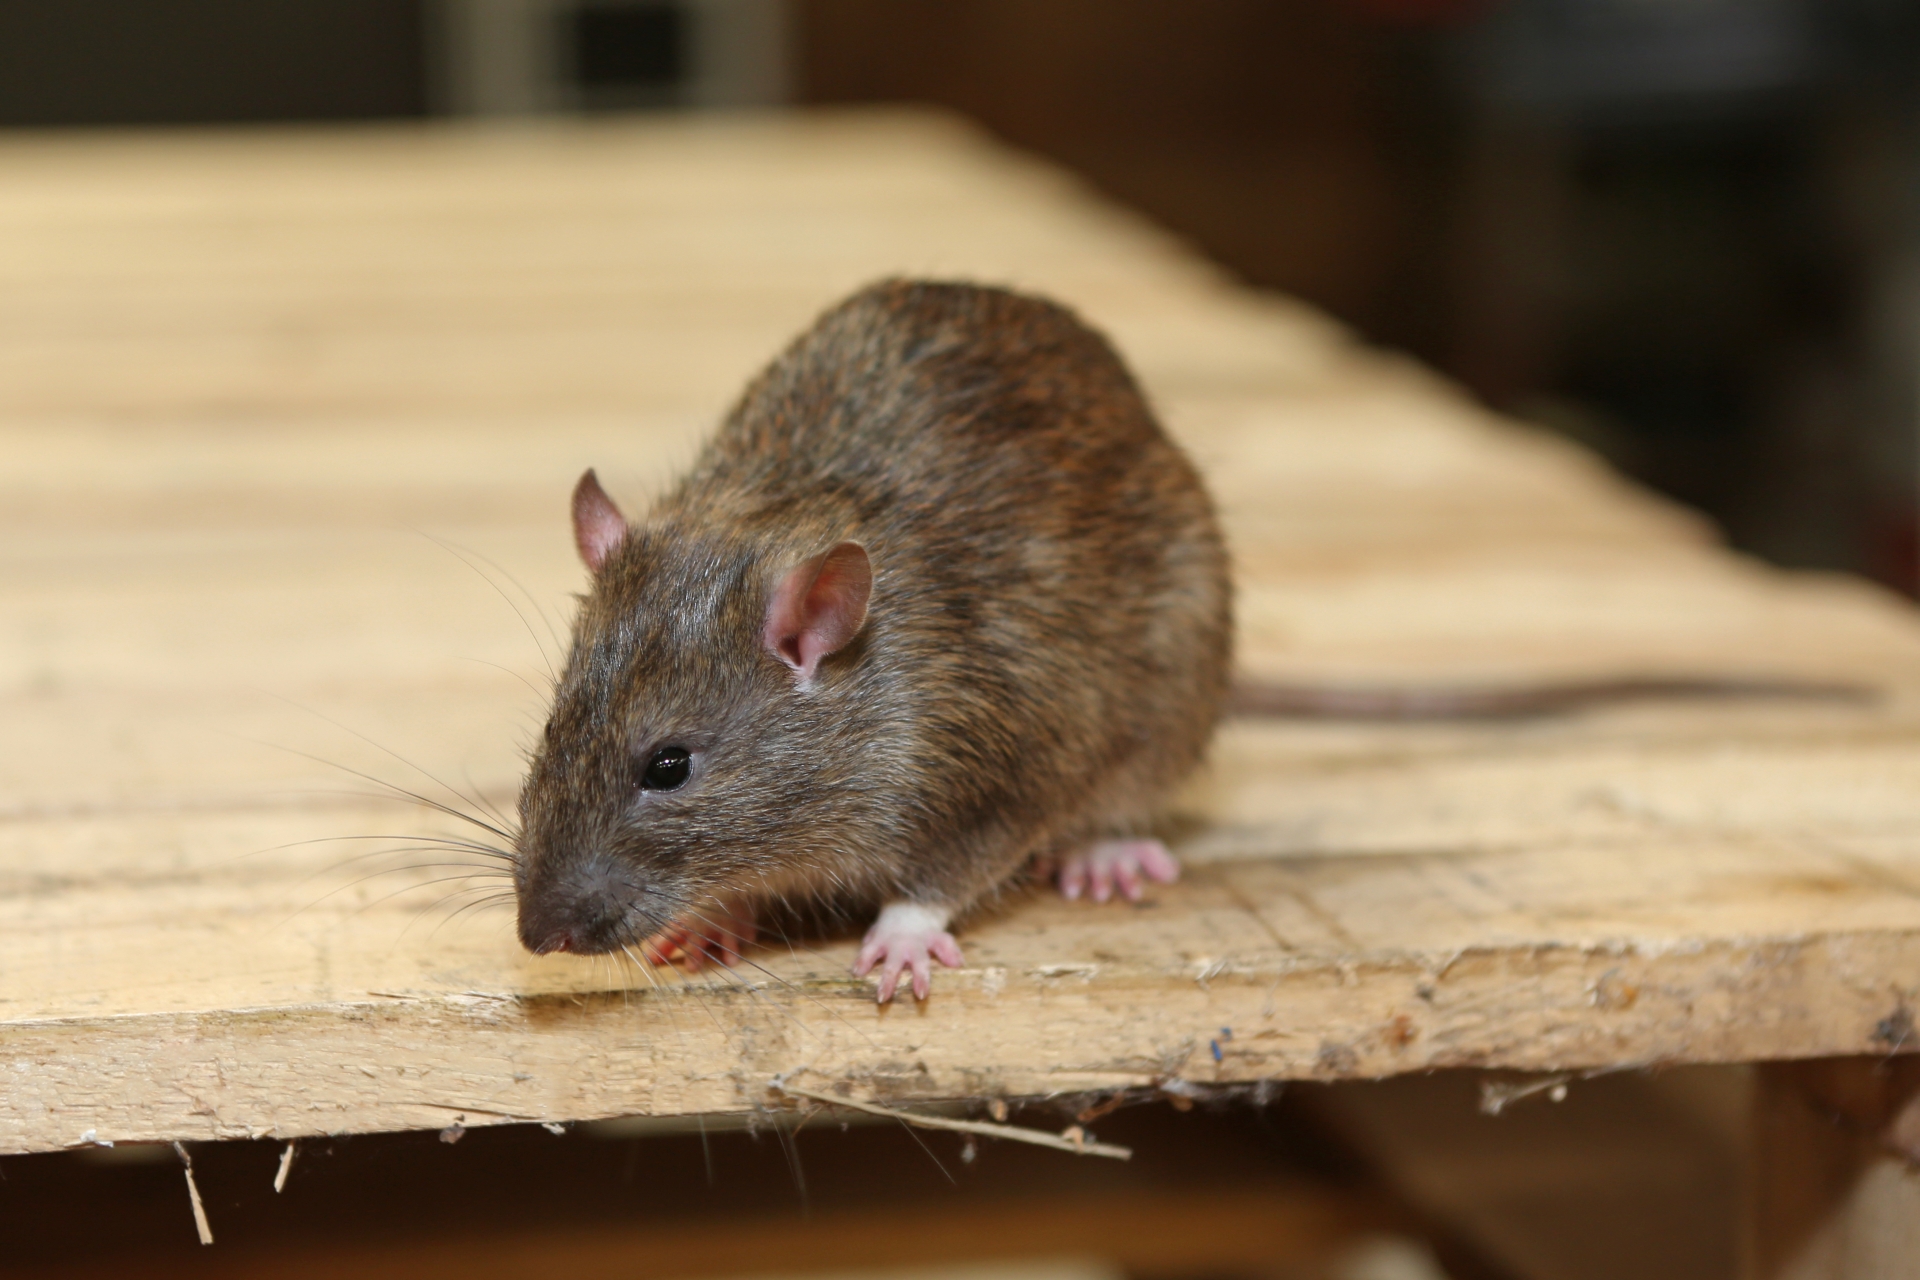 Rat extermination, Pest Control in Westcombe Park, SE3. Call Now 020 8166 9746